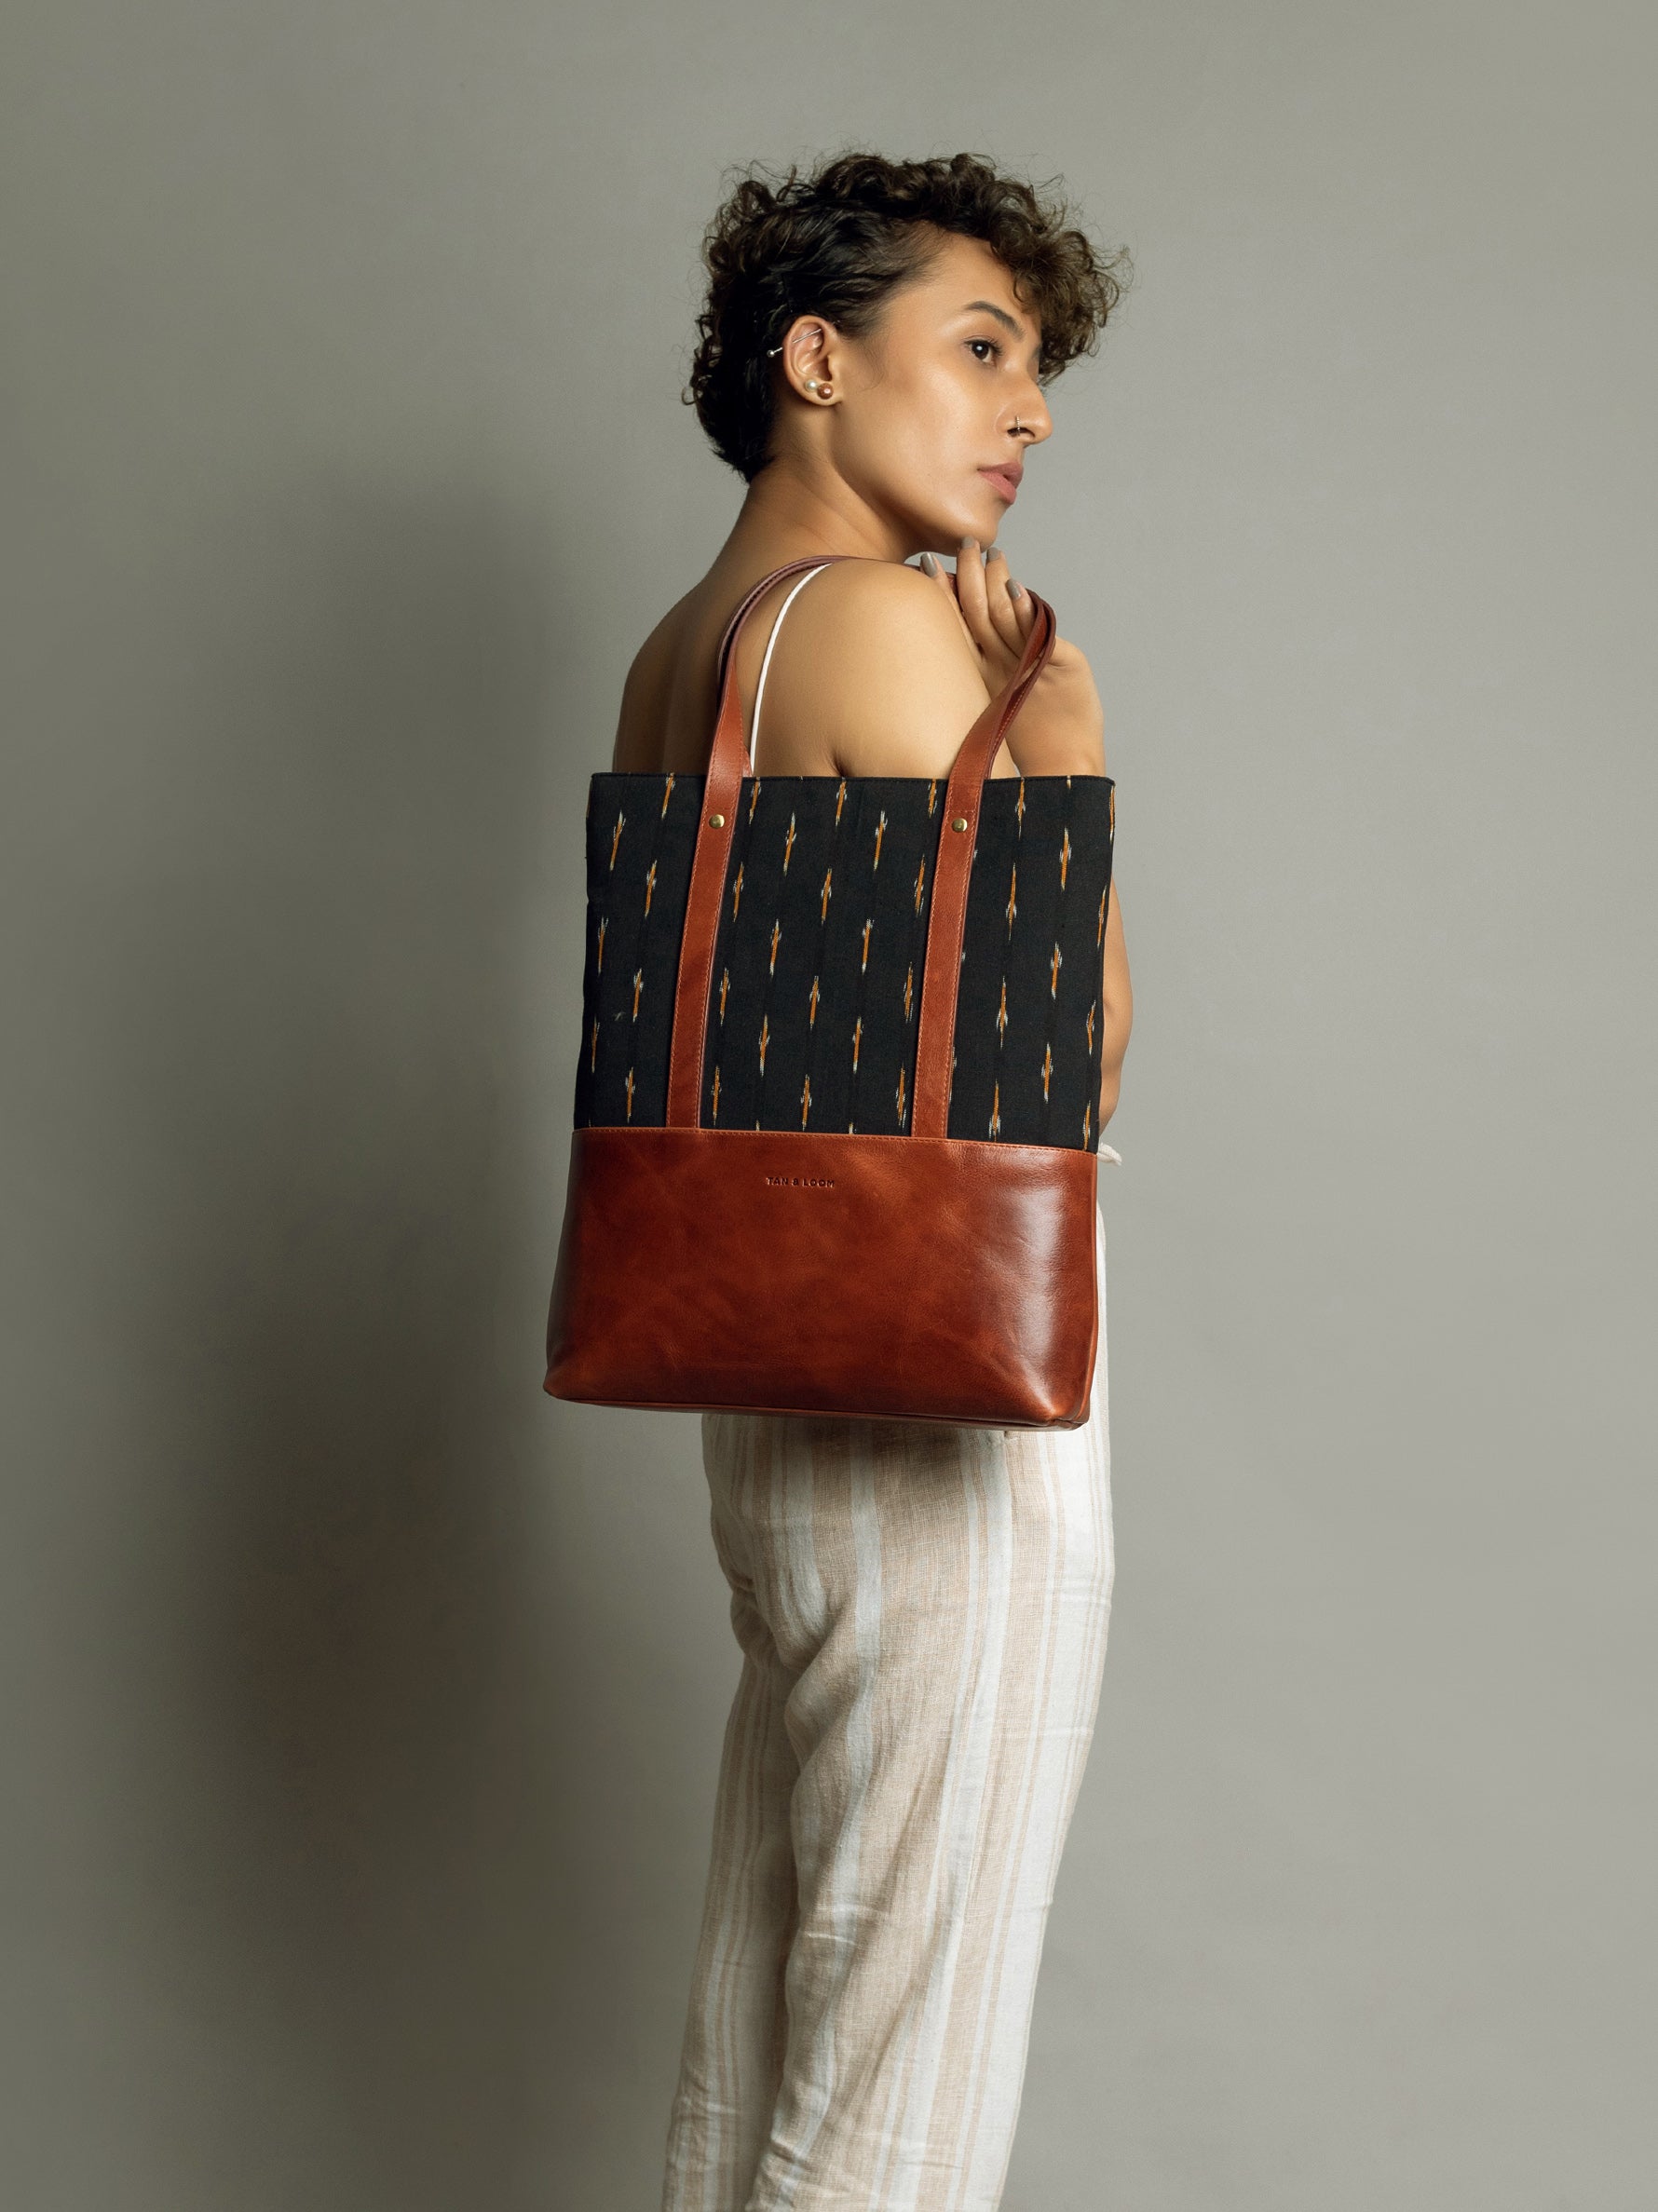 Handcrafted Premium Genuine Vegetable Tanned Leather & Ikat Black & Yellow Classic Tote Bag for Women Tan & Loom